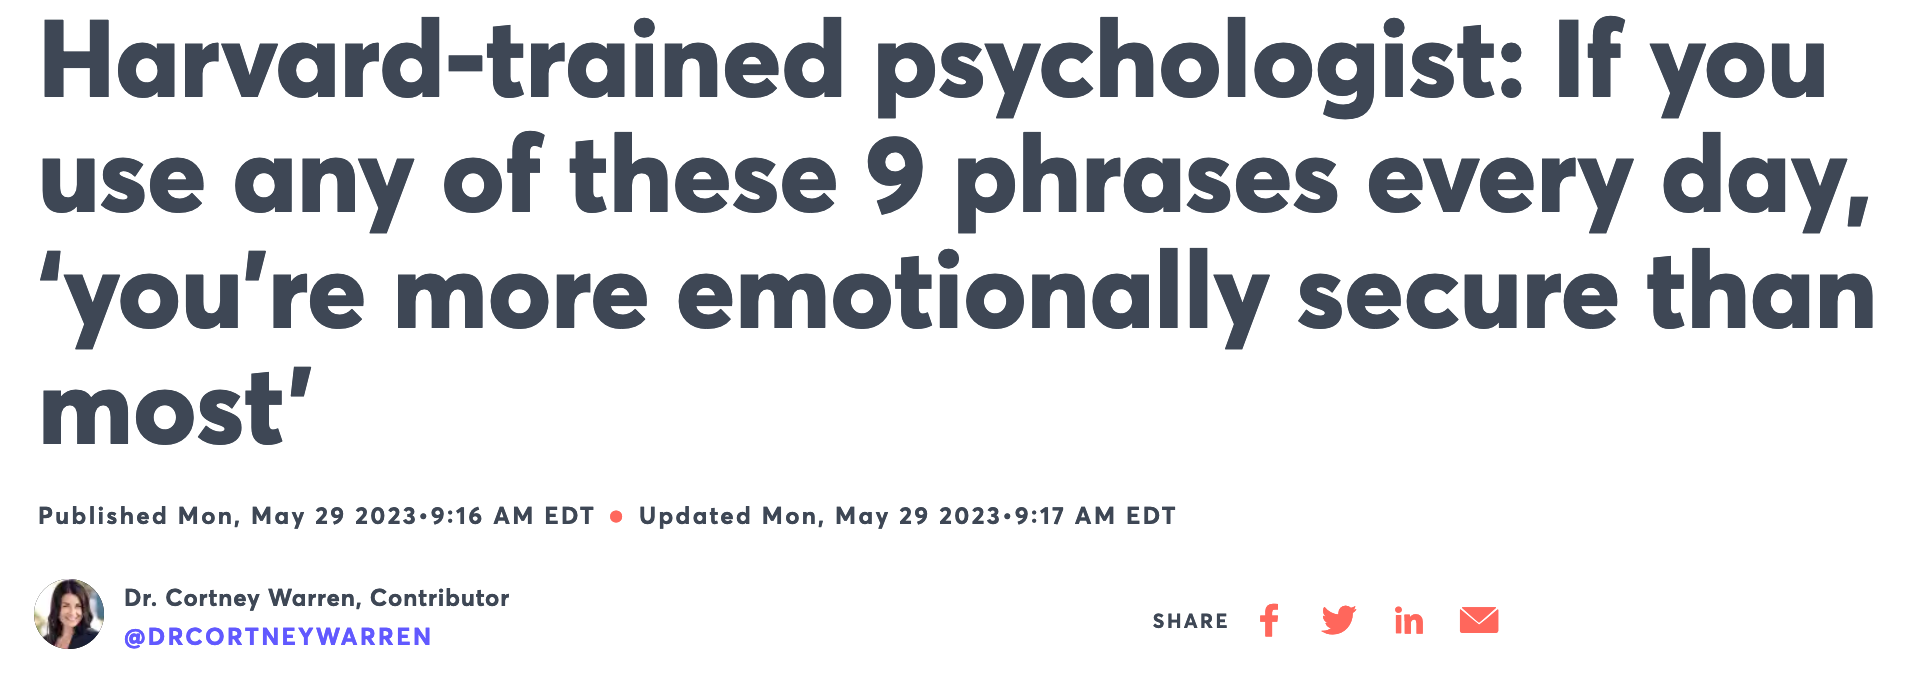 A headline that reads: Harvard-trained psycholgist: if you use any of these phrases you're more emotionally more secure than most."